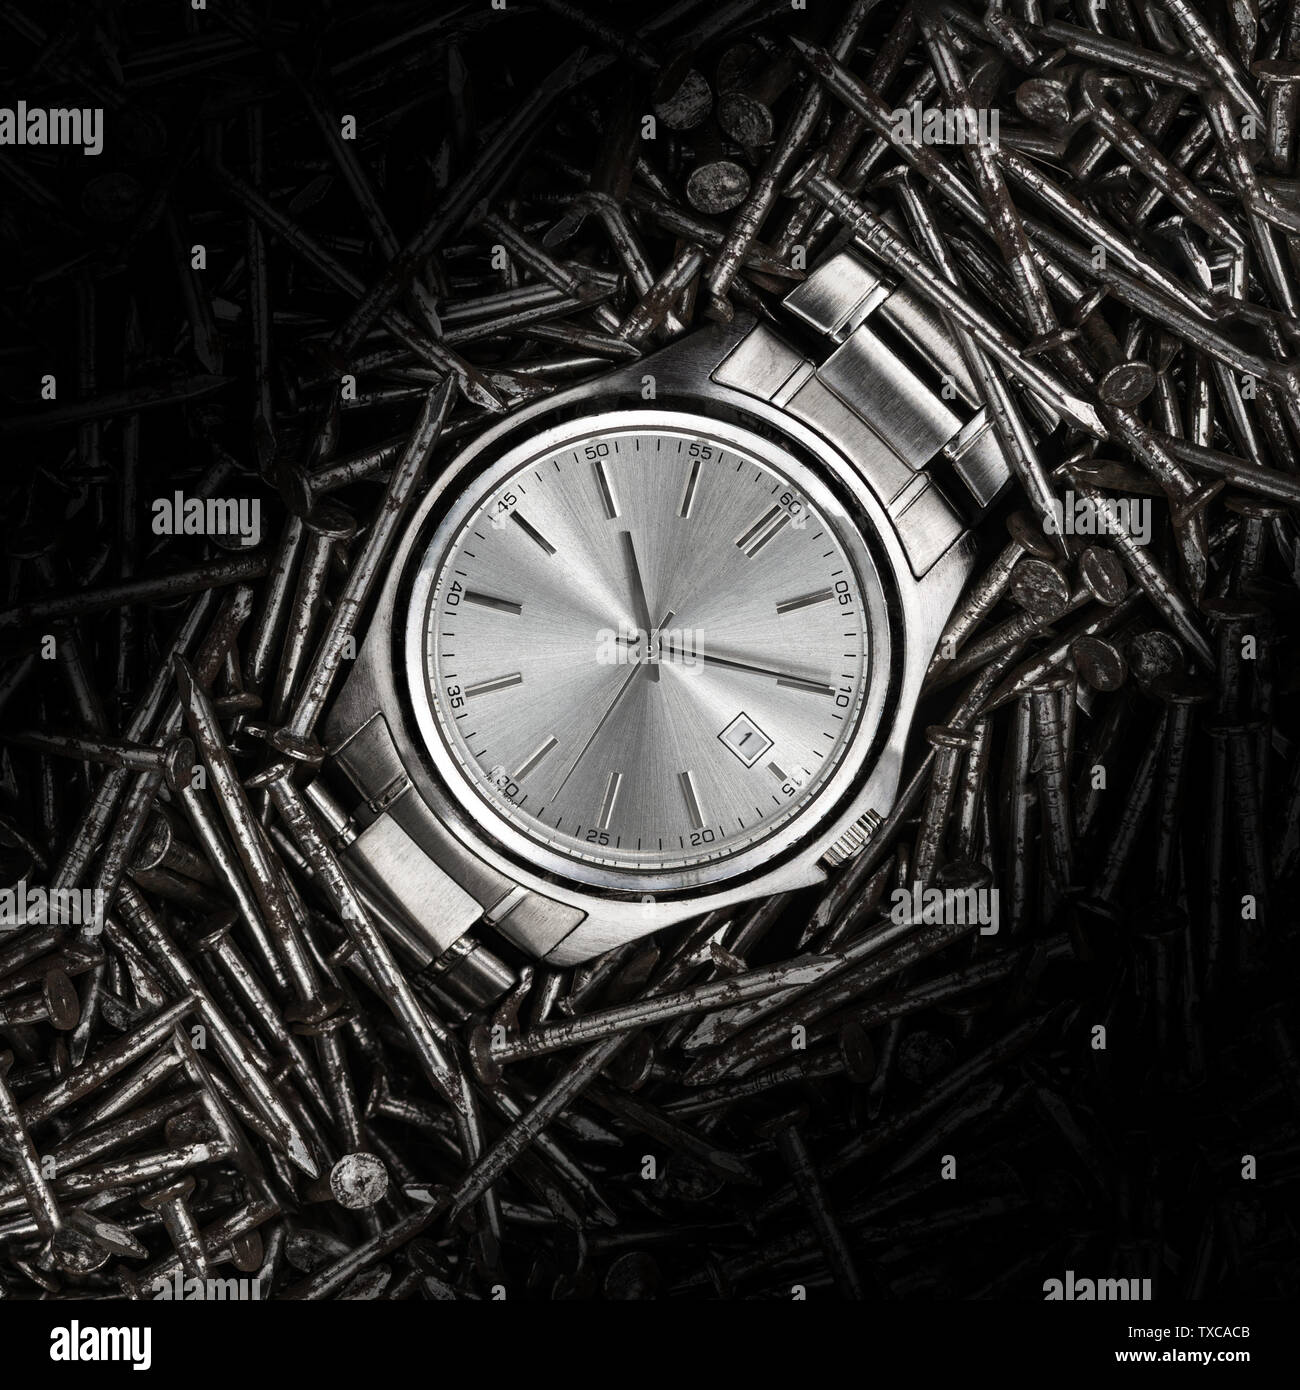 A beautiful stainless steel metal wrist watch laying on a bed of metail construction nails closeup macro Stock Photo